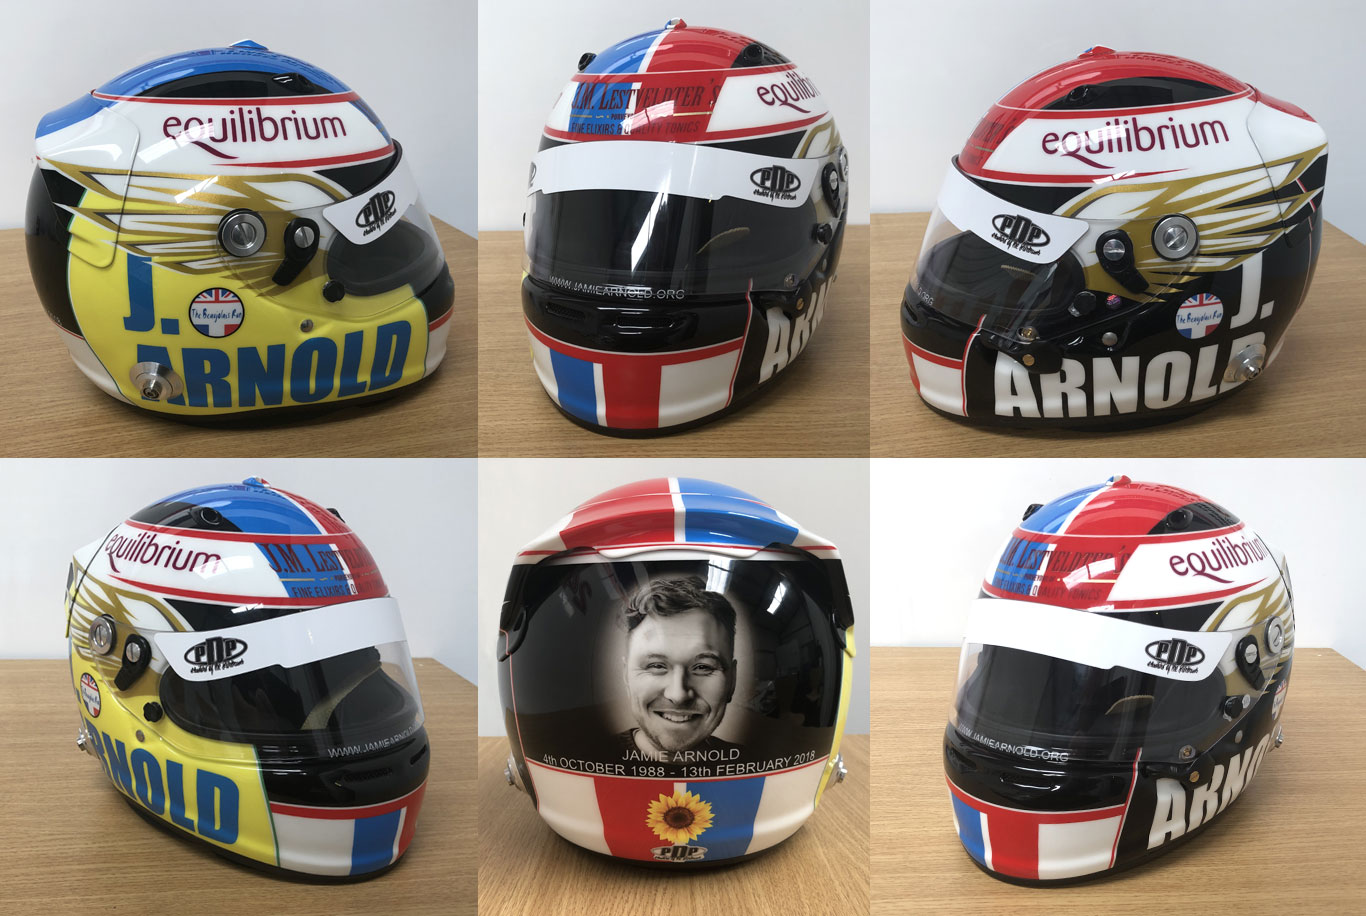 Special Commemorative Helmet in memory of Jamie Arnold,  4th October 1988 - 13th February 2018